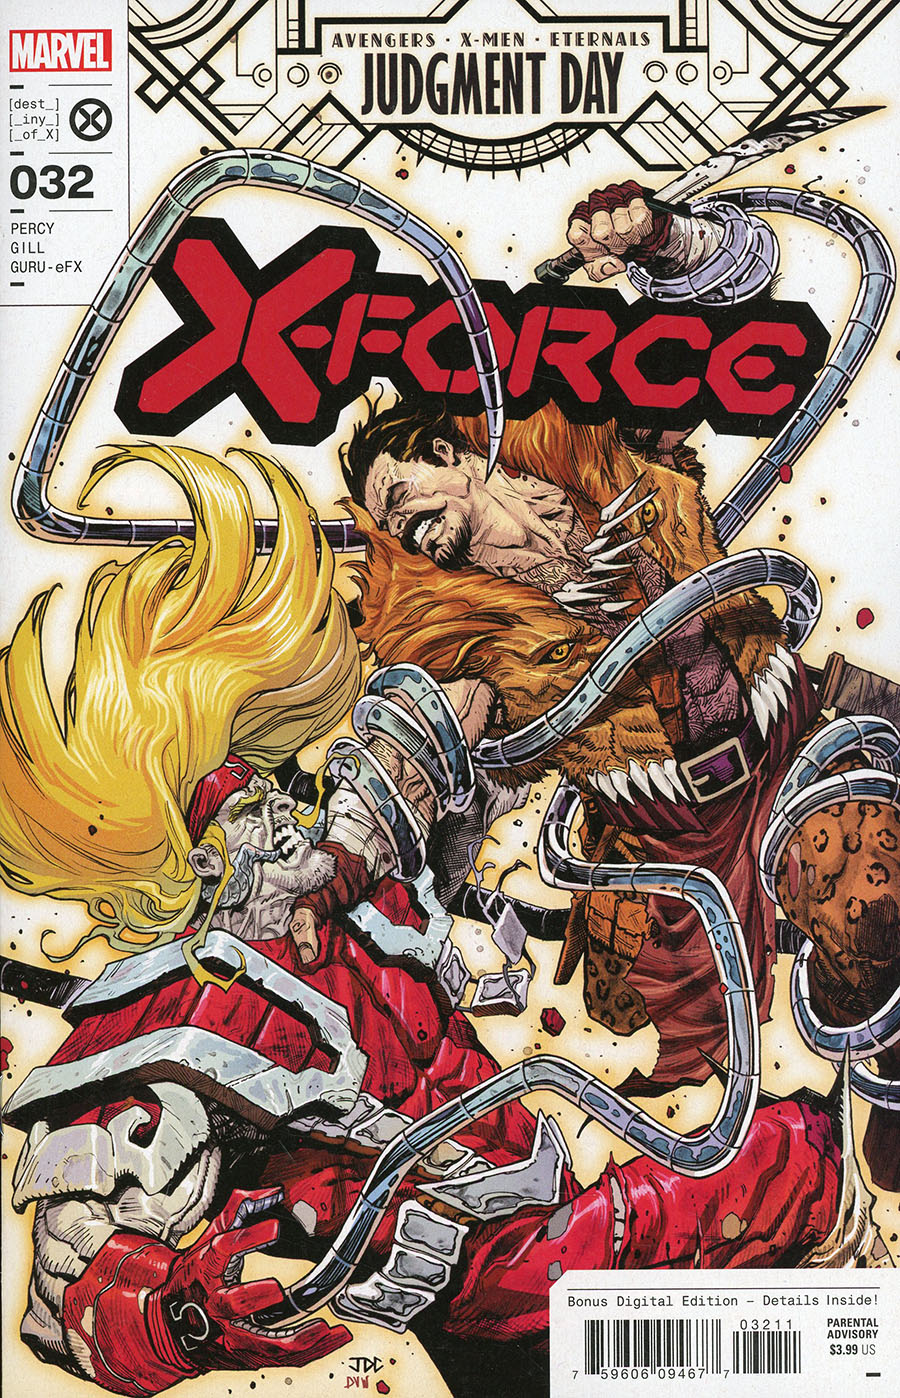 X-Force Vol 6 #32 Cover A Regular Joshua Cassara Cover (A.X.E. Judgment Day Tie-In)